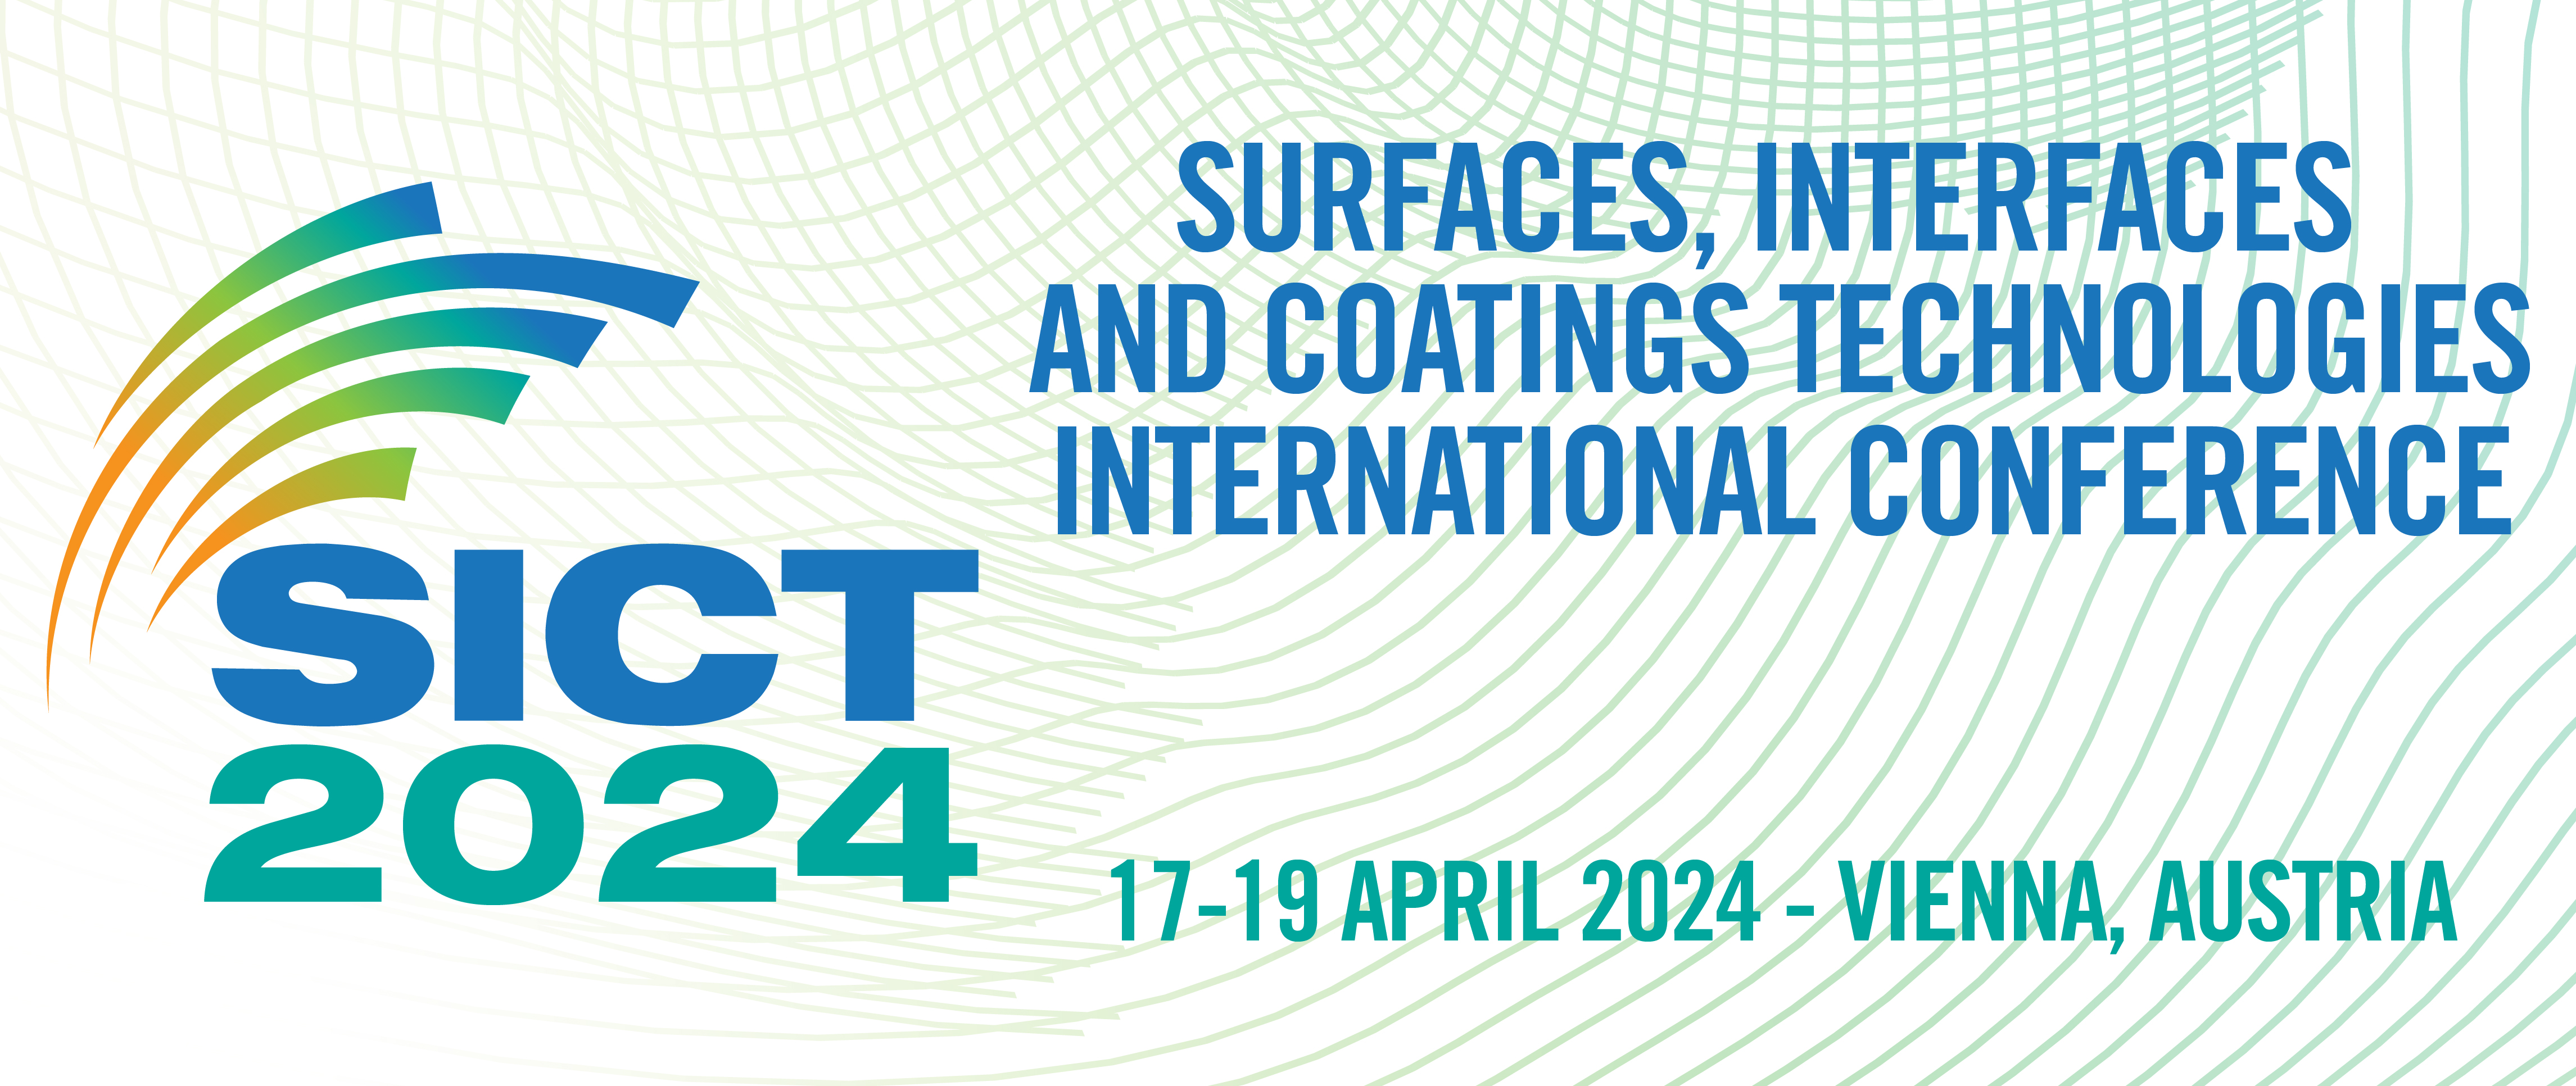 Surfaces, Interfaces and Coatings Technologies International conference - SICT 2024